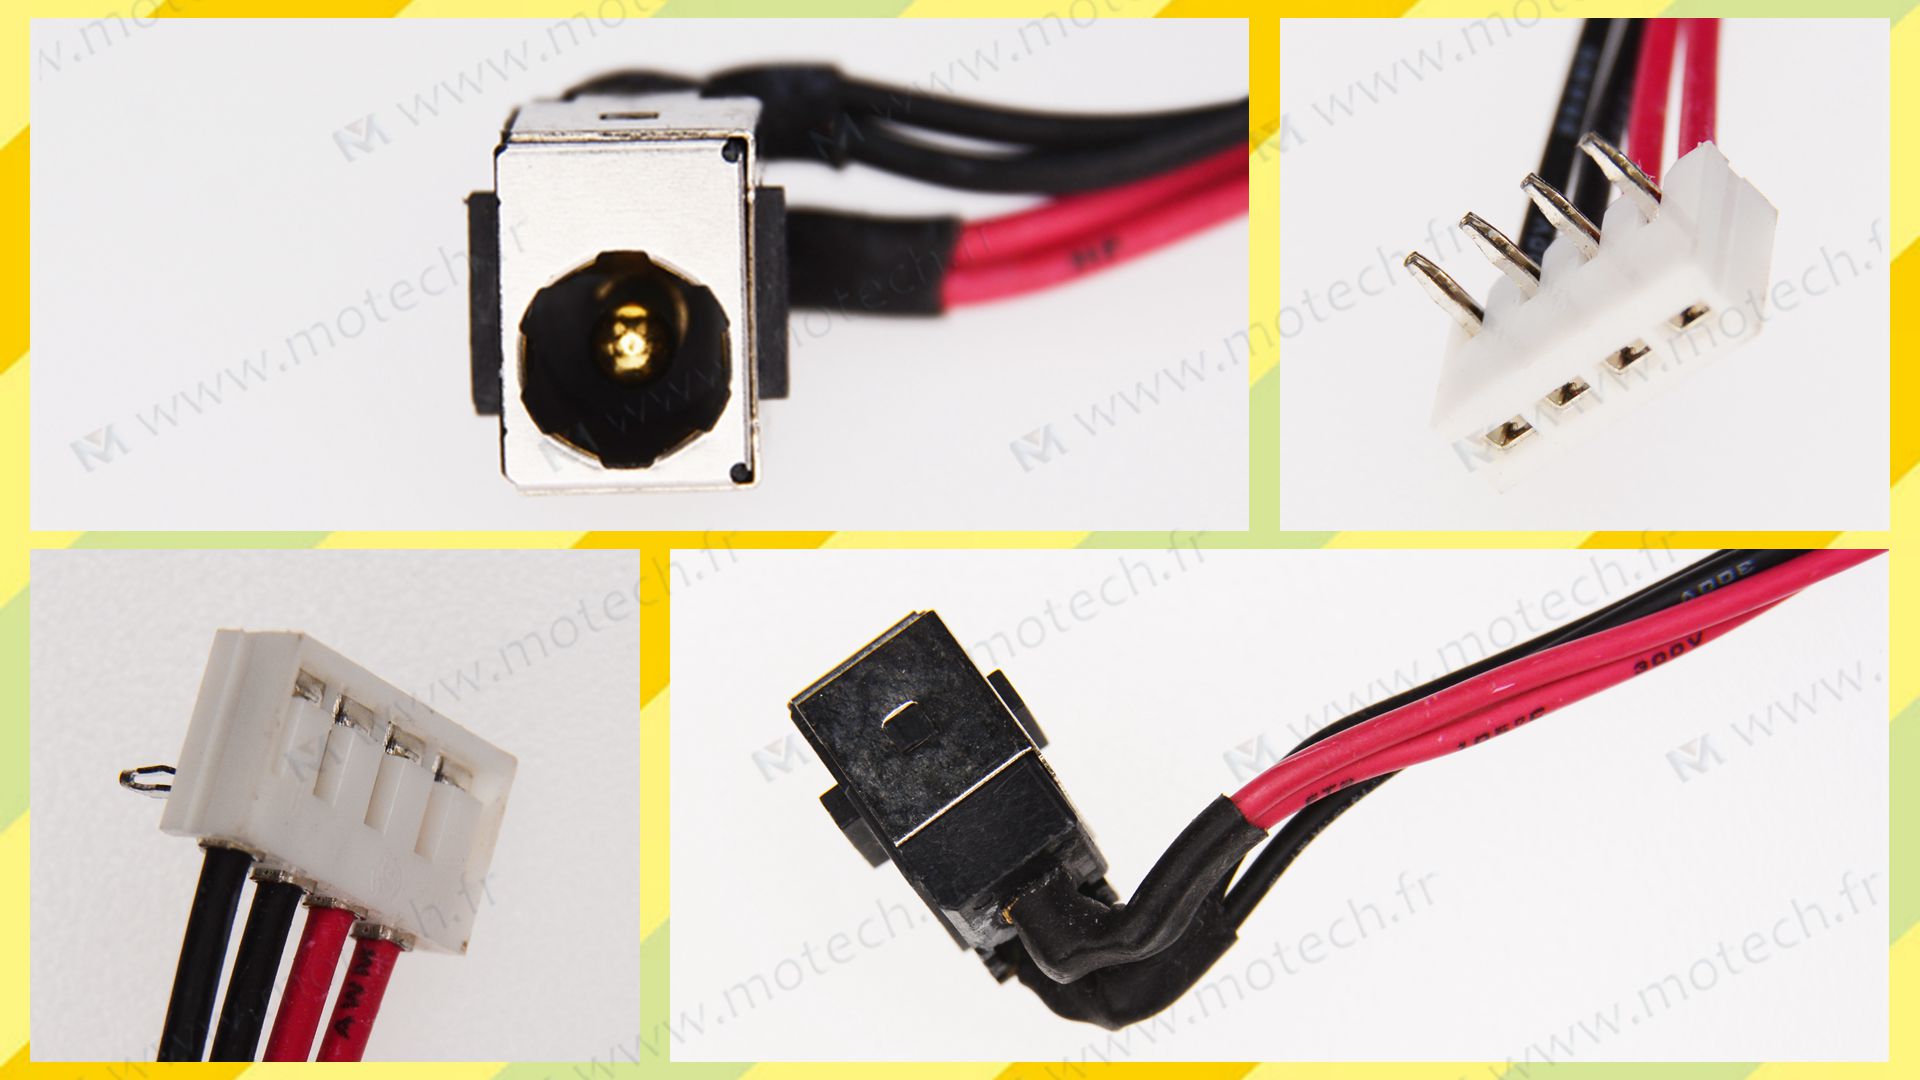 Toshiba L455 charging connector, Toshiba L455 DC Power Jack, Toshiba L455 DC IN Cable, Toshiba L455 Power Jack, Toshiba L455 plug, Toshiba L455 Jack socket, Toshiba L455 connecteur de charge, 